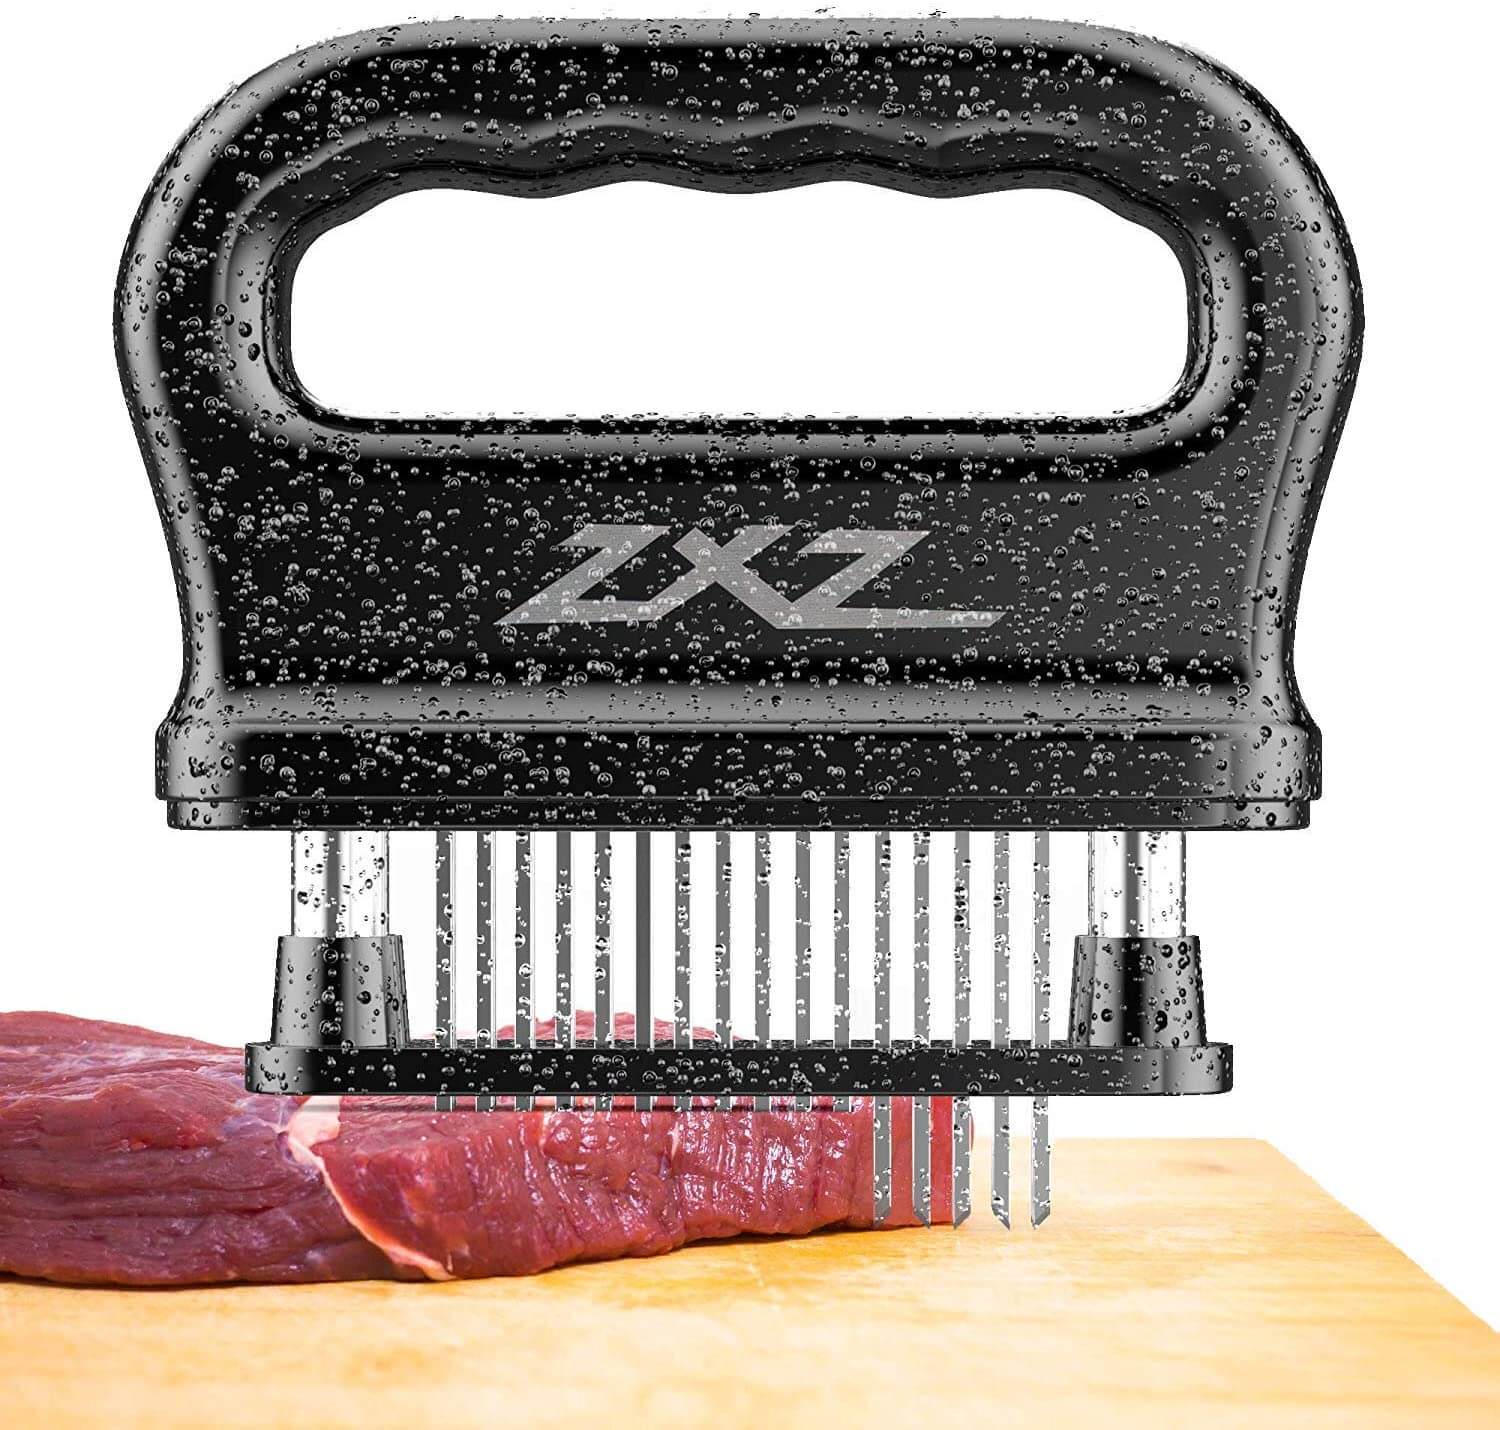 XSpecial Meat Tenderizer Tool 48 Blades Stainless Steel, Easy to